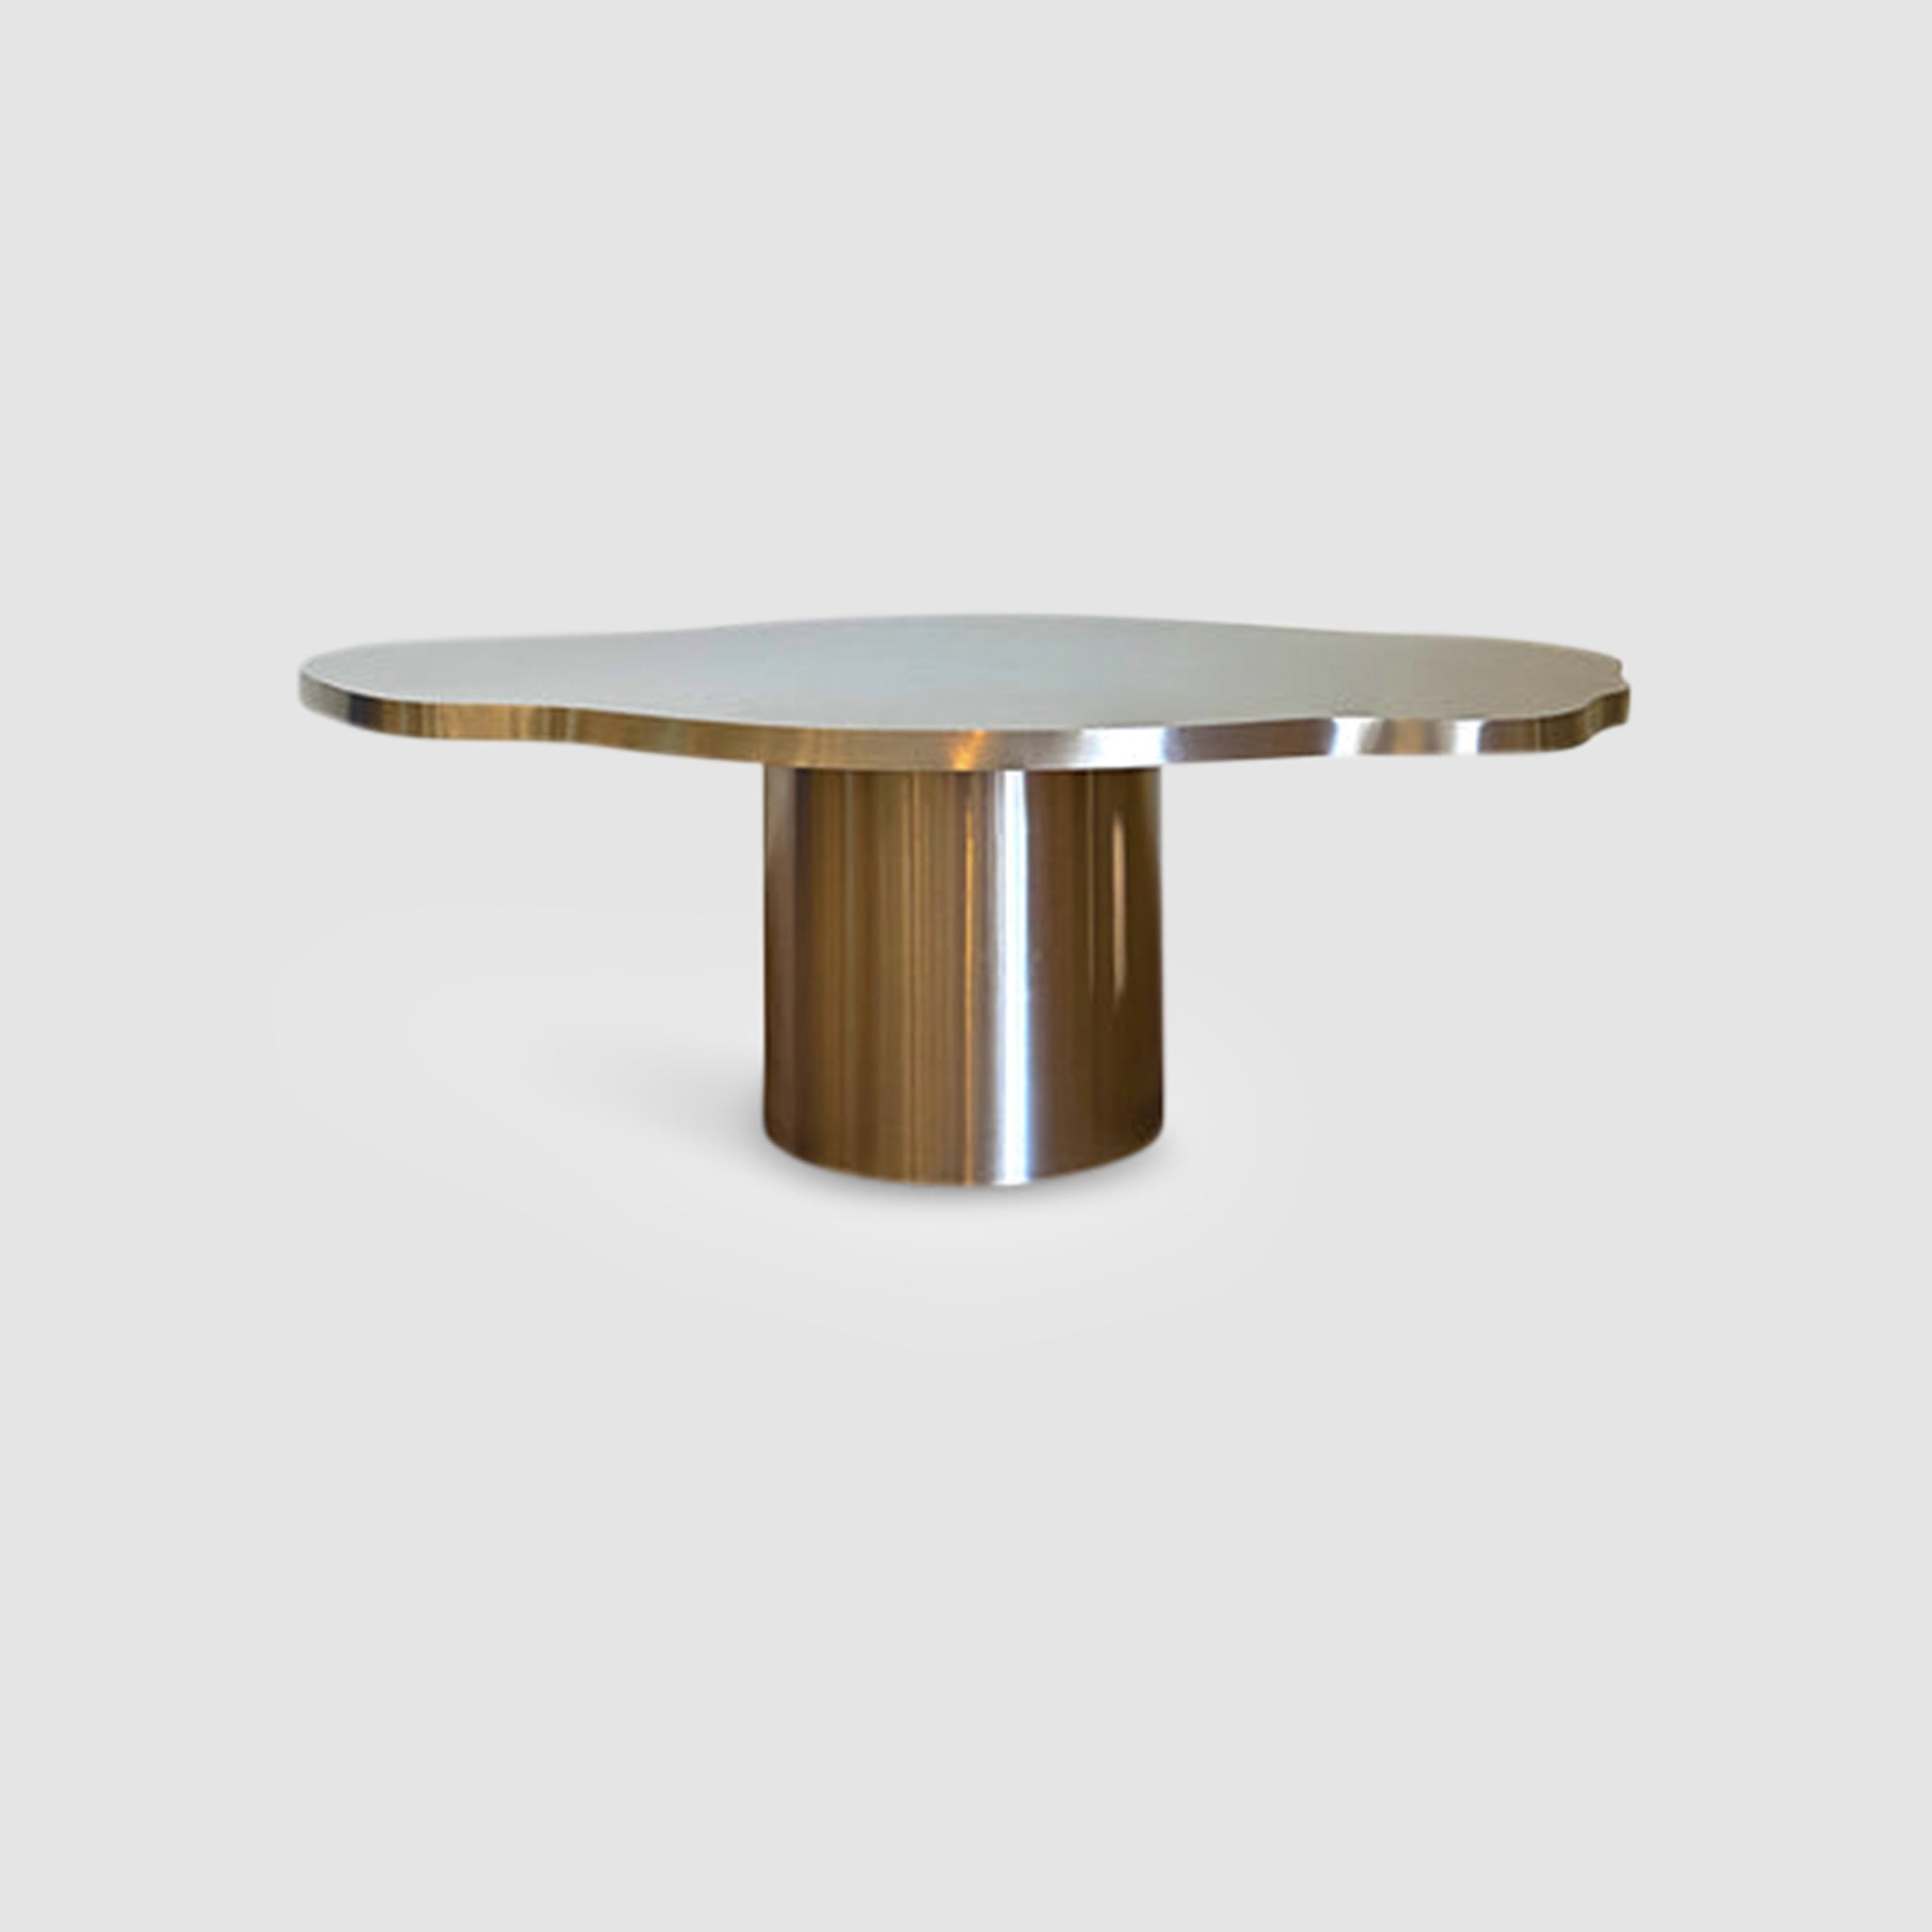 Brushed Stainless Steel Coffee Table: The Jamie Table offers a sleek and contemporary look.